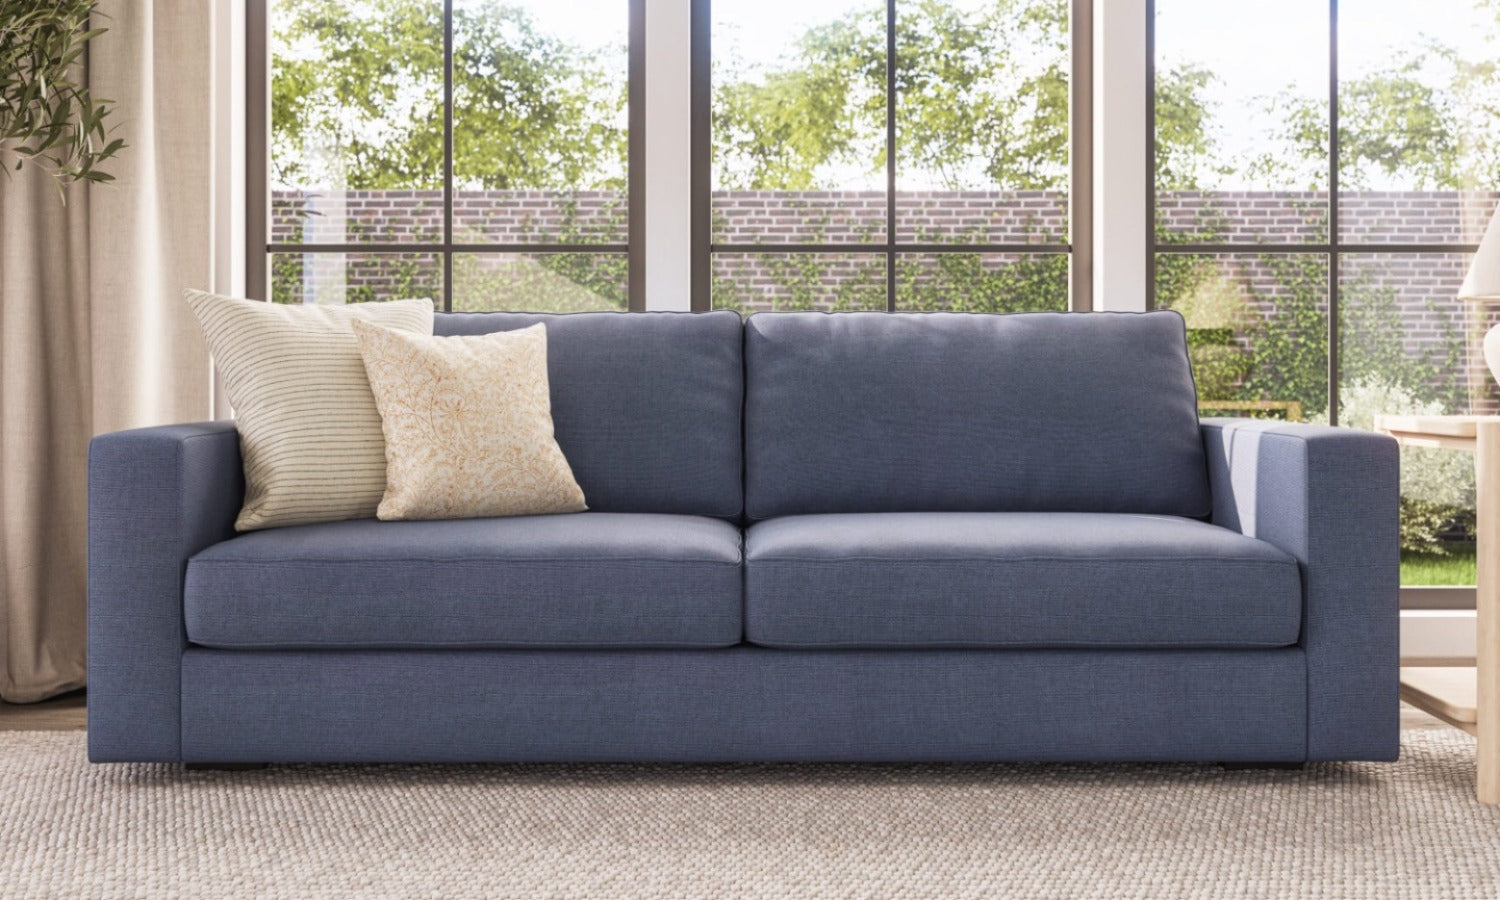 G: 88" Rio Sofa shown in Texture French Blue fabric